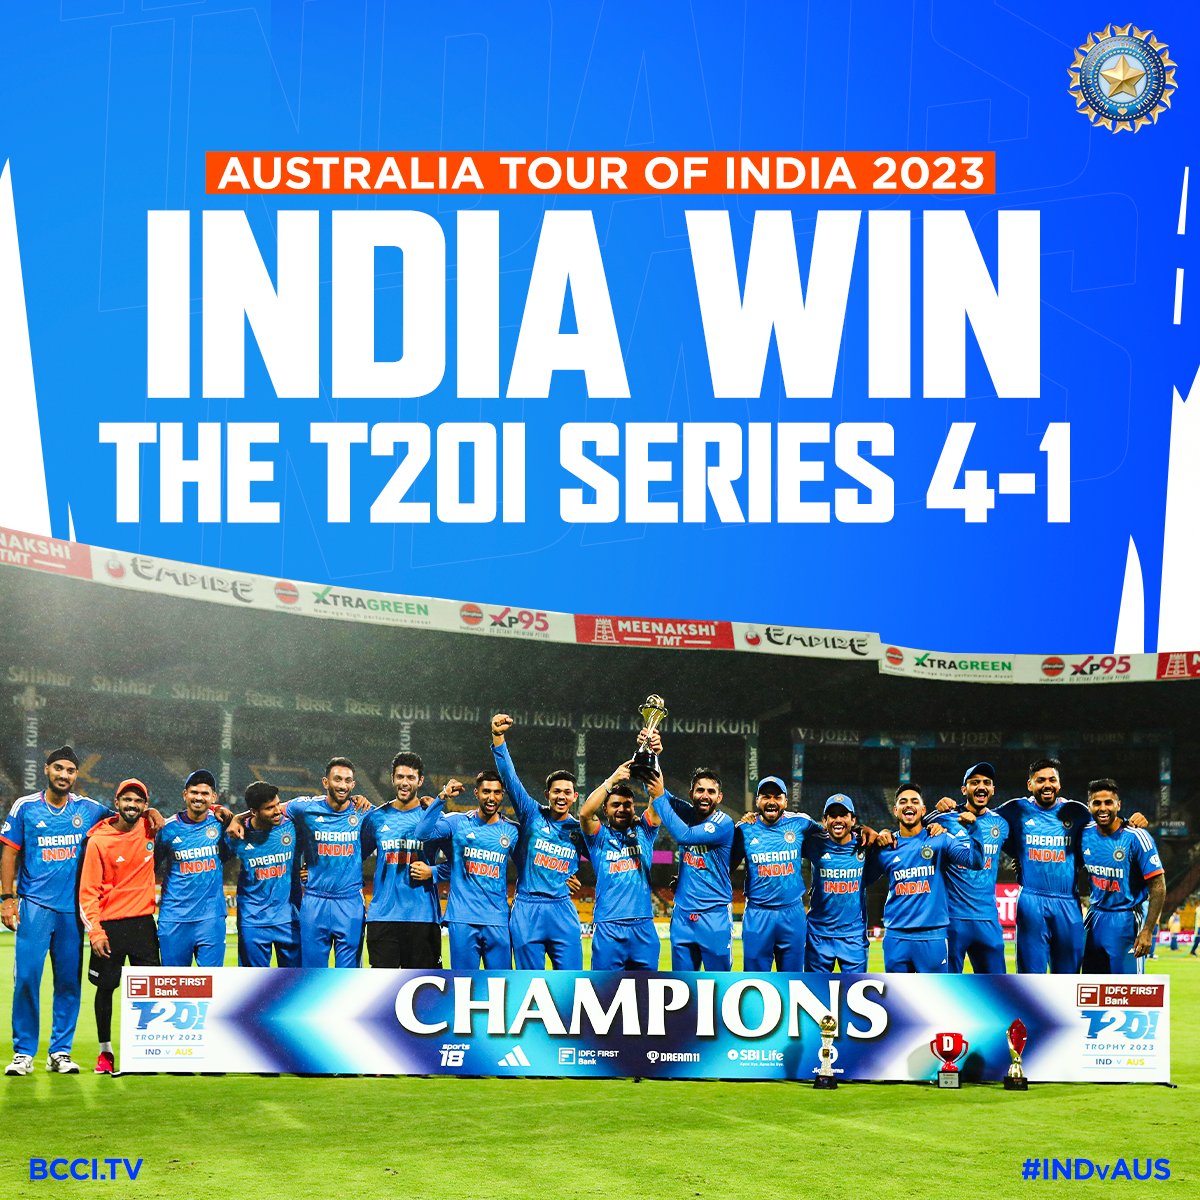 Congratulations team #India win the #INDvAUS T20I series 4-1 🙌

Hard luck for world cup 🎉

#TeamIndia | @IDFCFIRSTBank #Indiavsaustralia